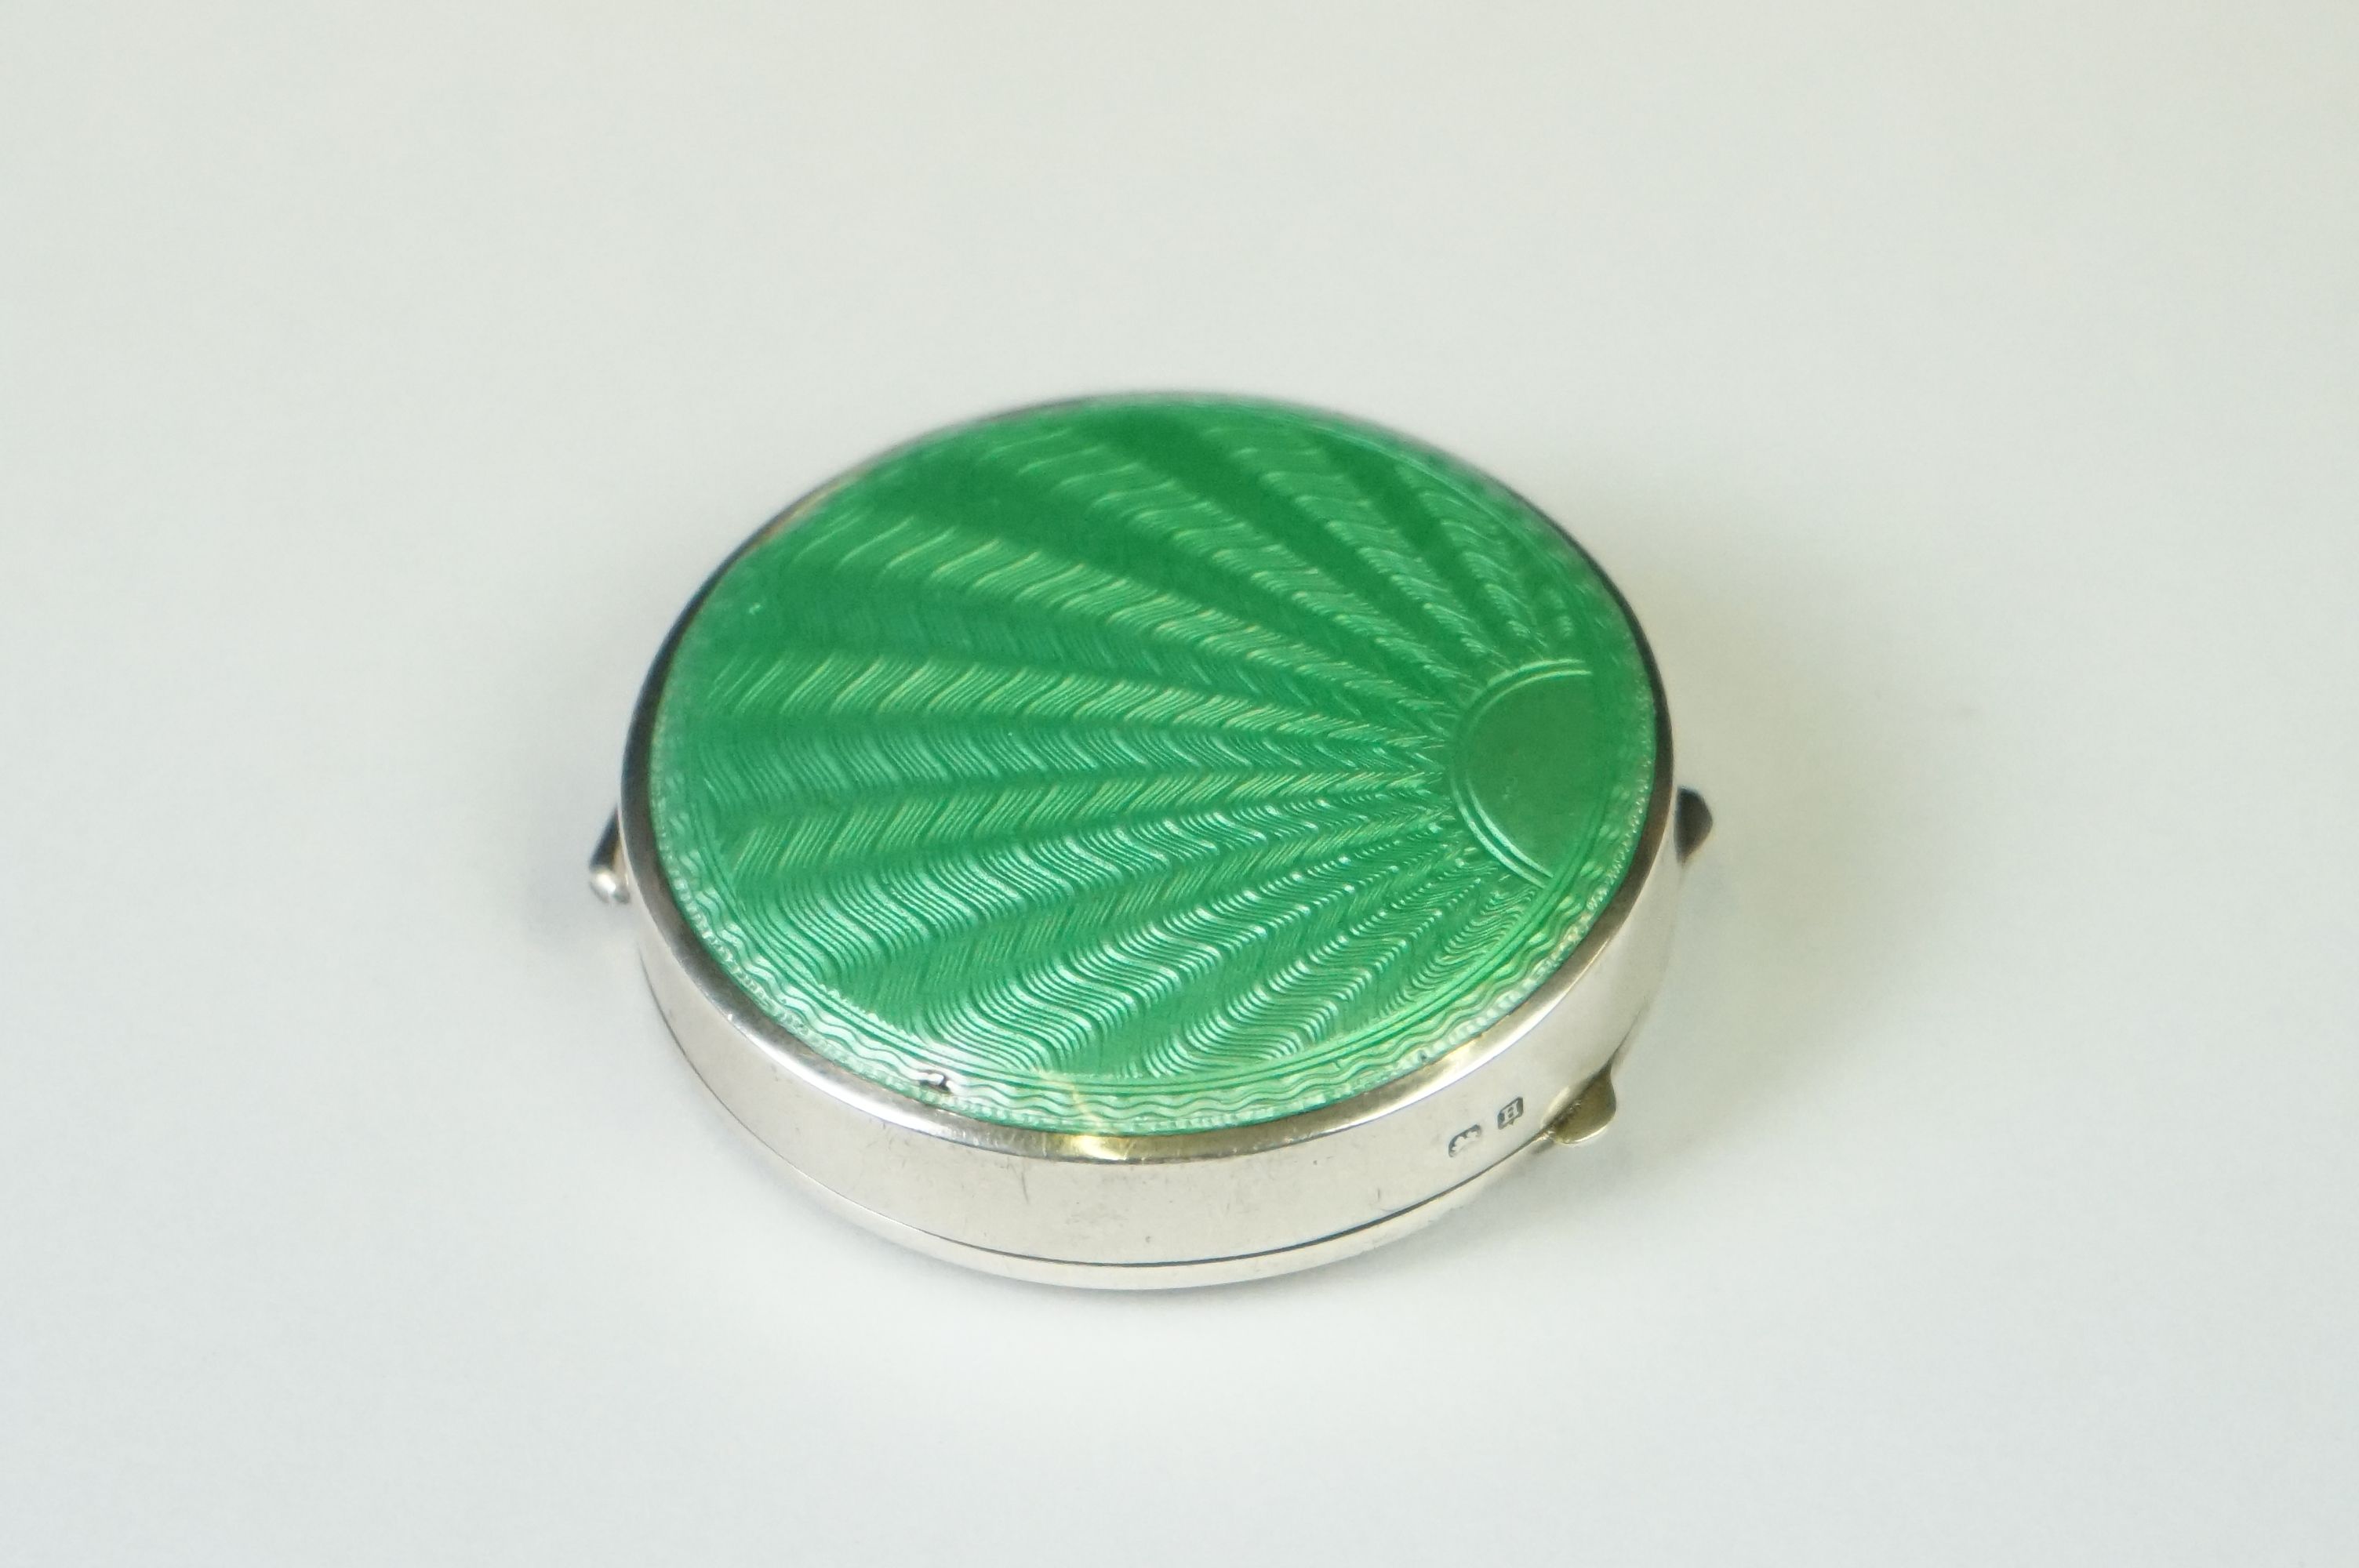 A fully hallmarked sterling silver and enamel Art Deco powder compact with green guilloche